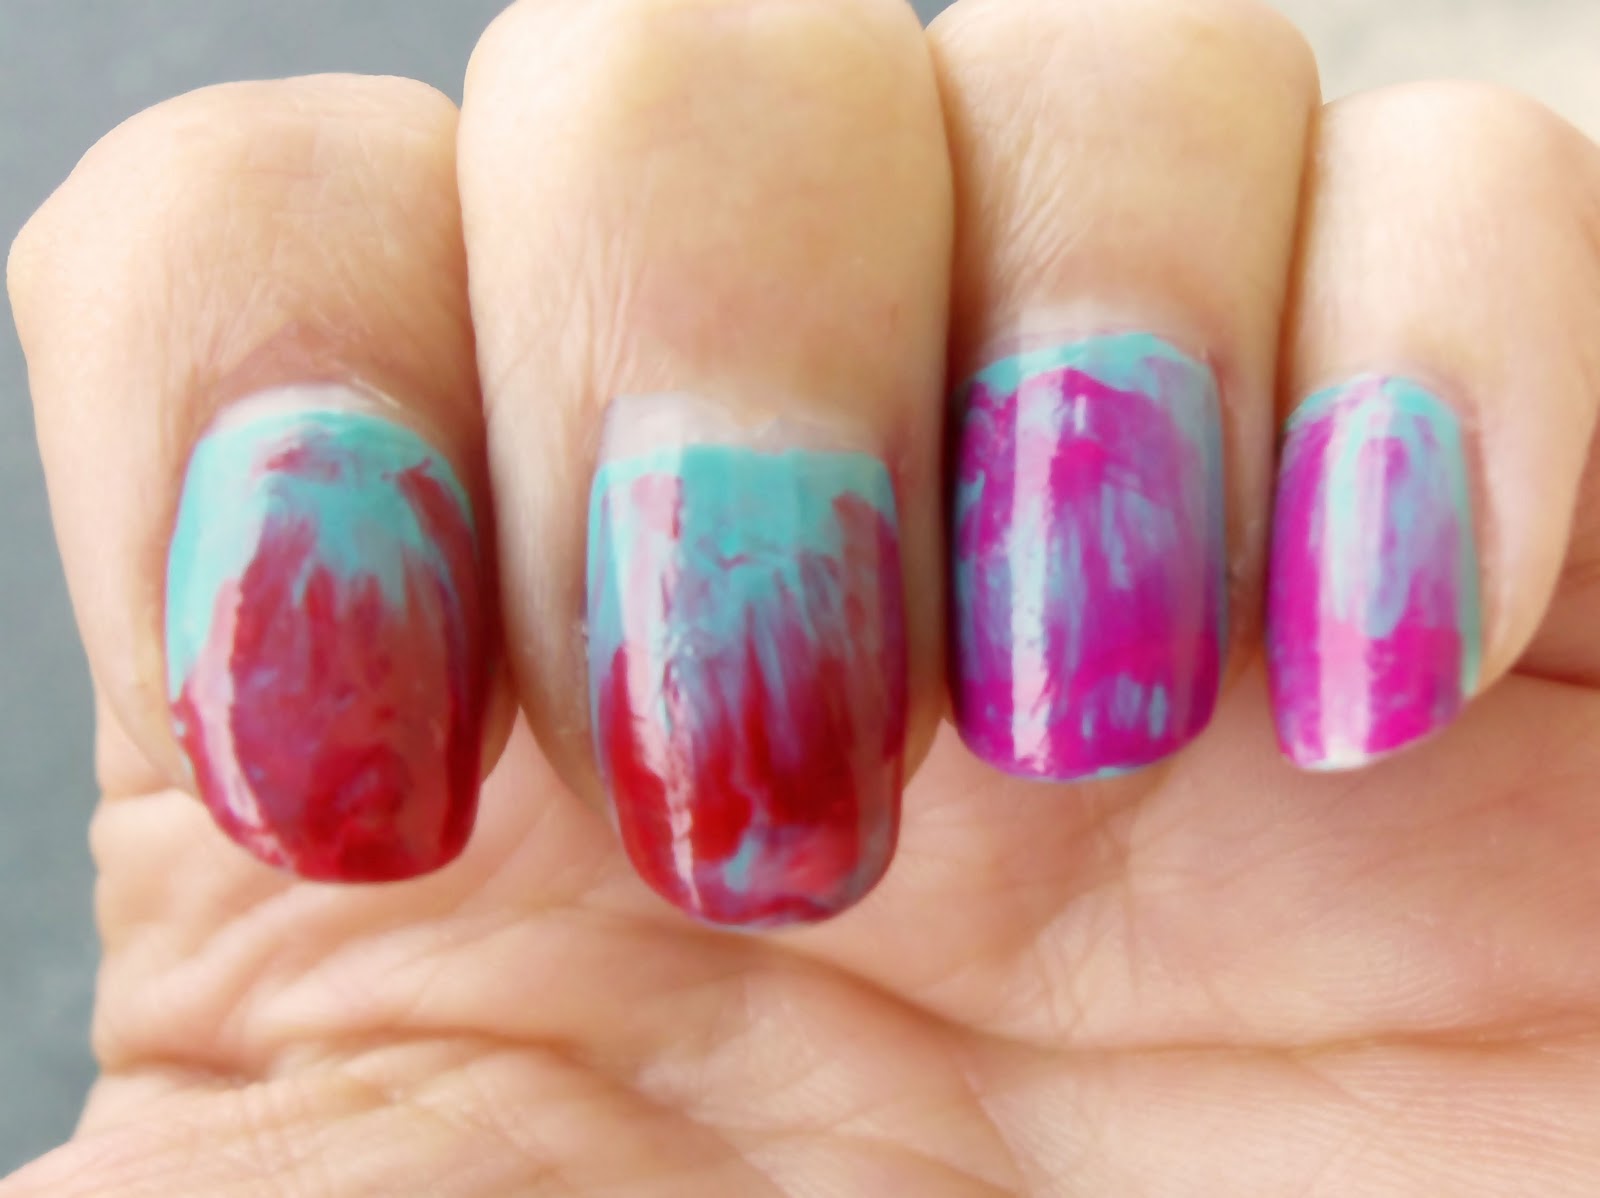 Nail Polish Techniques for Watercolor Nail Art - wide 2